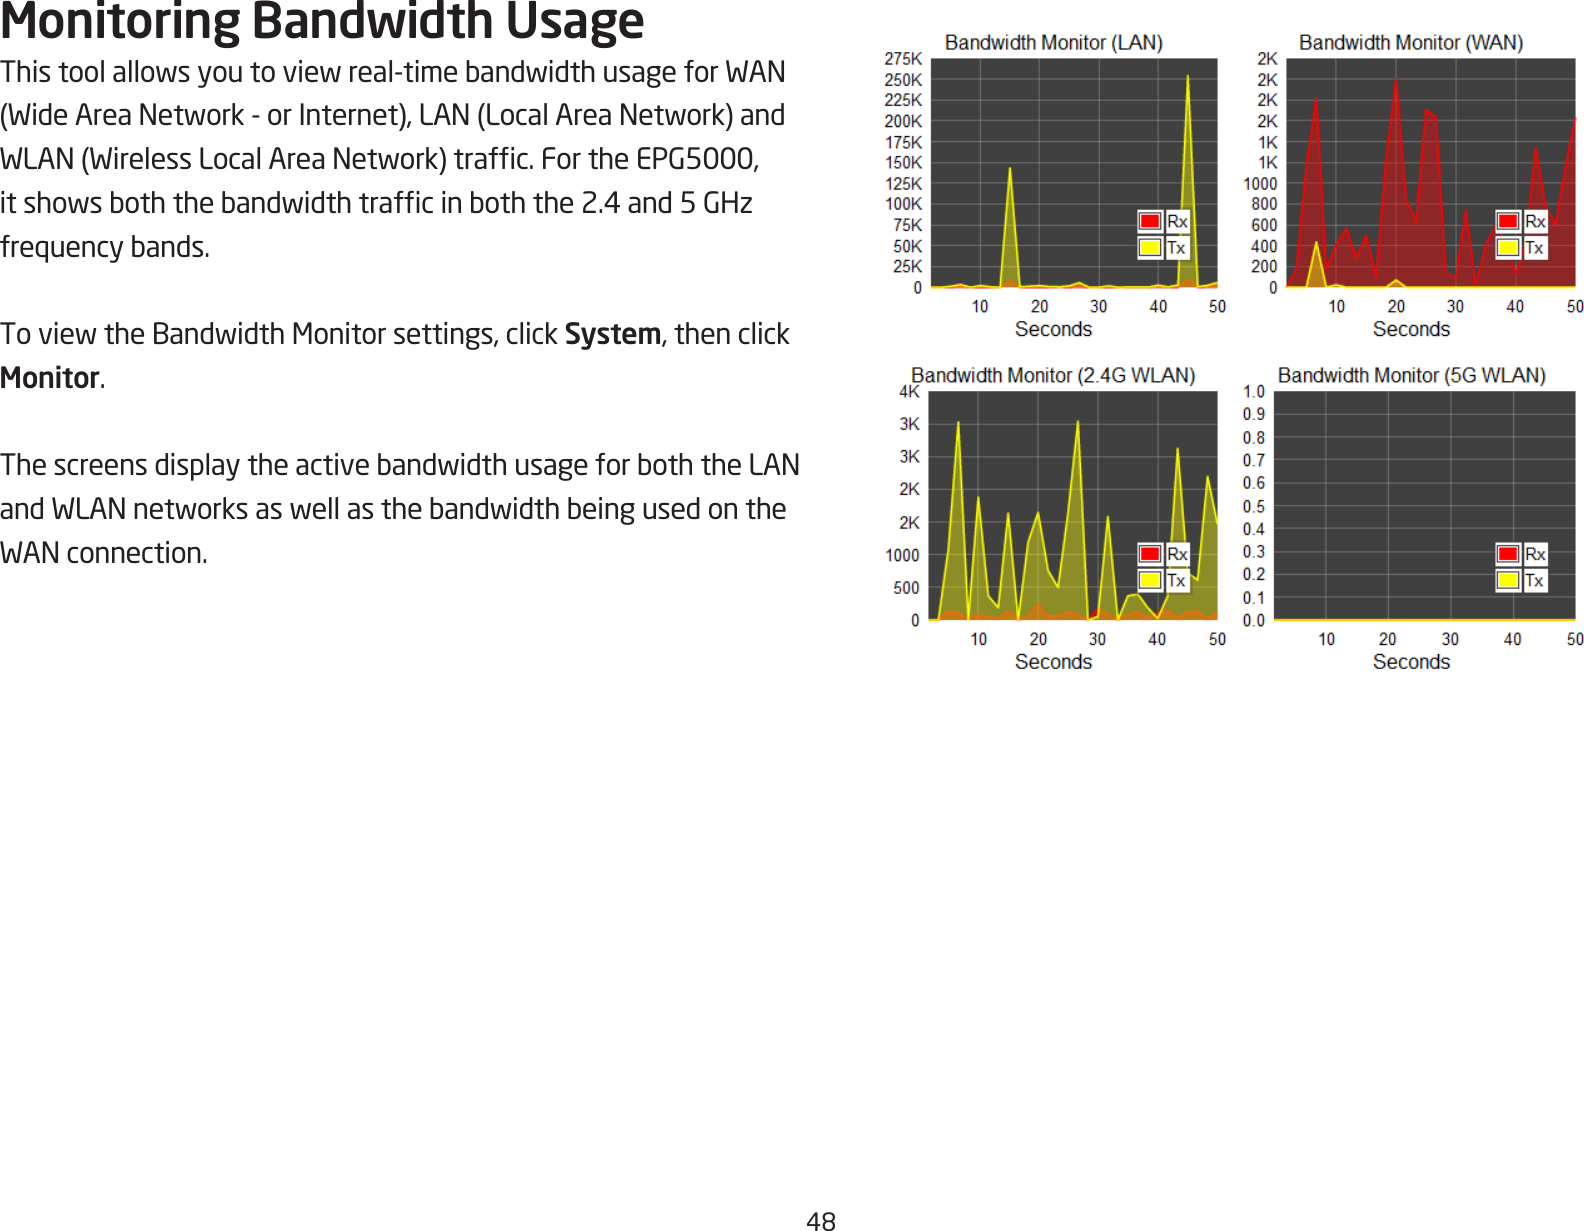 48Monitoring Bandwidth UsageThistoolallowsyoutoviewreal-timebandwidthusageforWAN(WideAreaNetwork-orInternet),LAN(LocalAreaNetwork)andWLAN(WirelessLocalAreaNetwork)trafc.FortheEPG5000,itshowsboththebandwidthtrafcinboththe2.4and5GHzfrequencybands.ToviewtheBandwidthMonitorsettings,clickSystem, then click Monitor.ThescreensdisplaytheactivebandwidthusageforboththeLANandWLANnetworksaswellasthebandwidthbeingusedontheWANconnection.